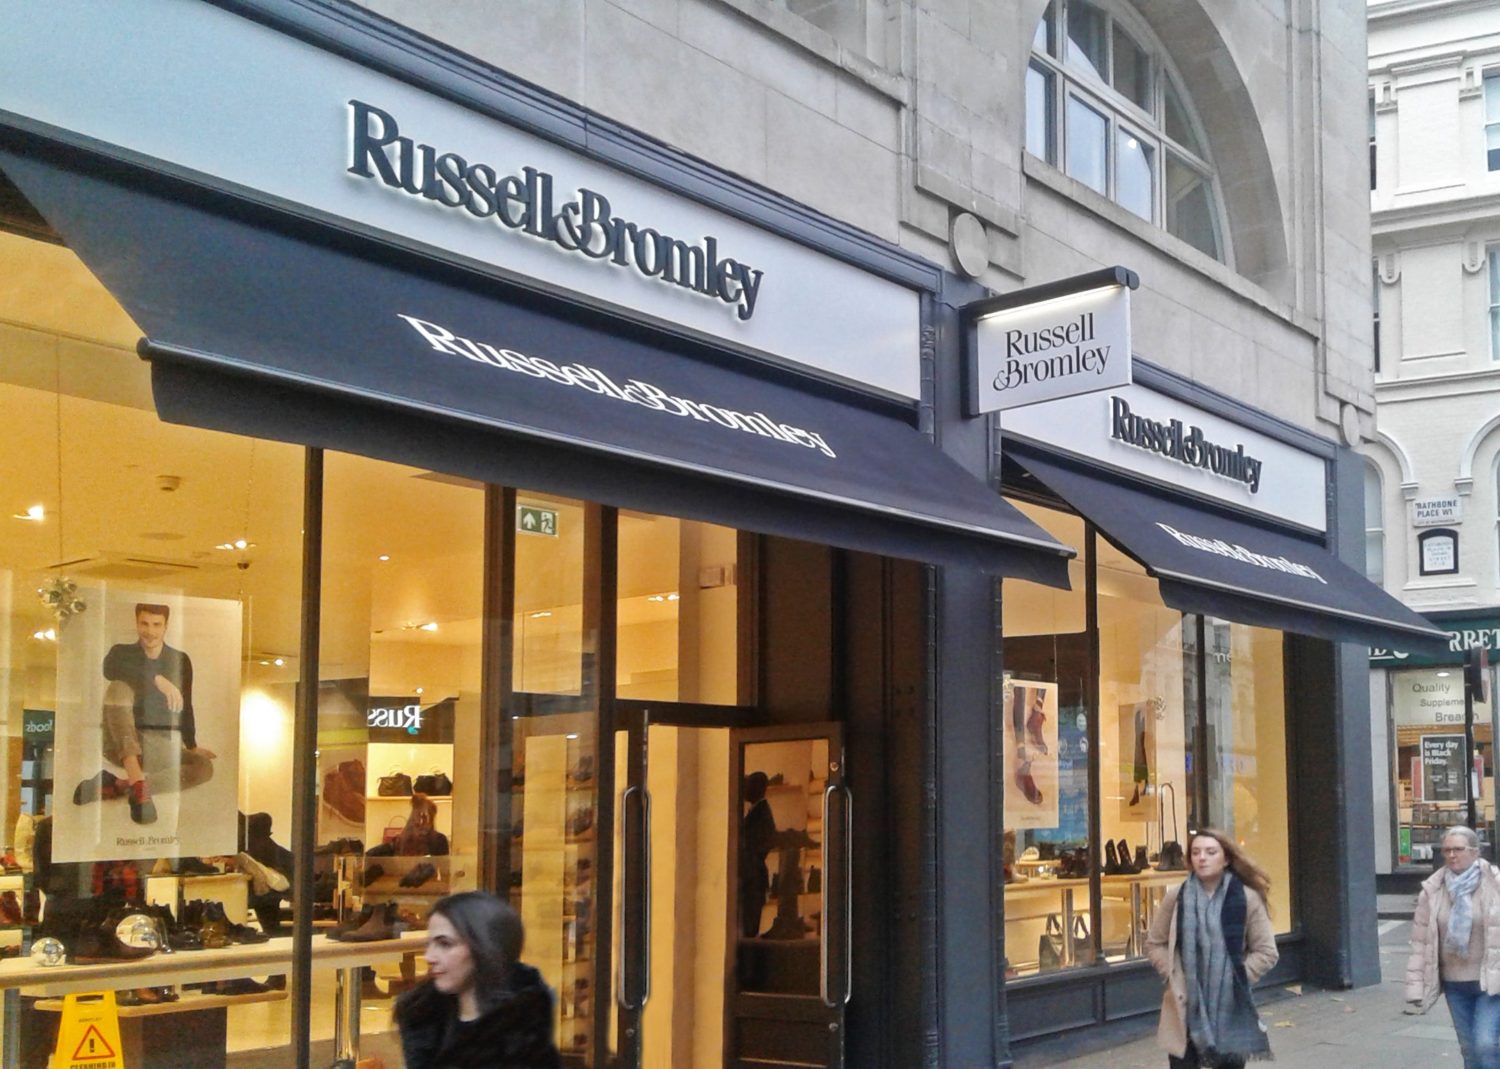 Russell-bromley